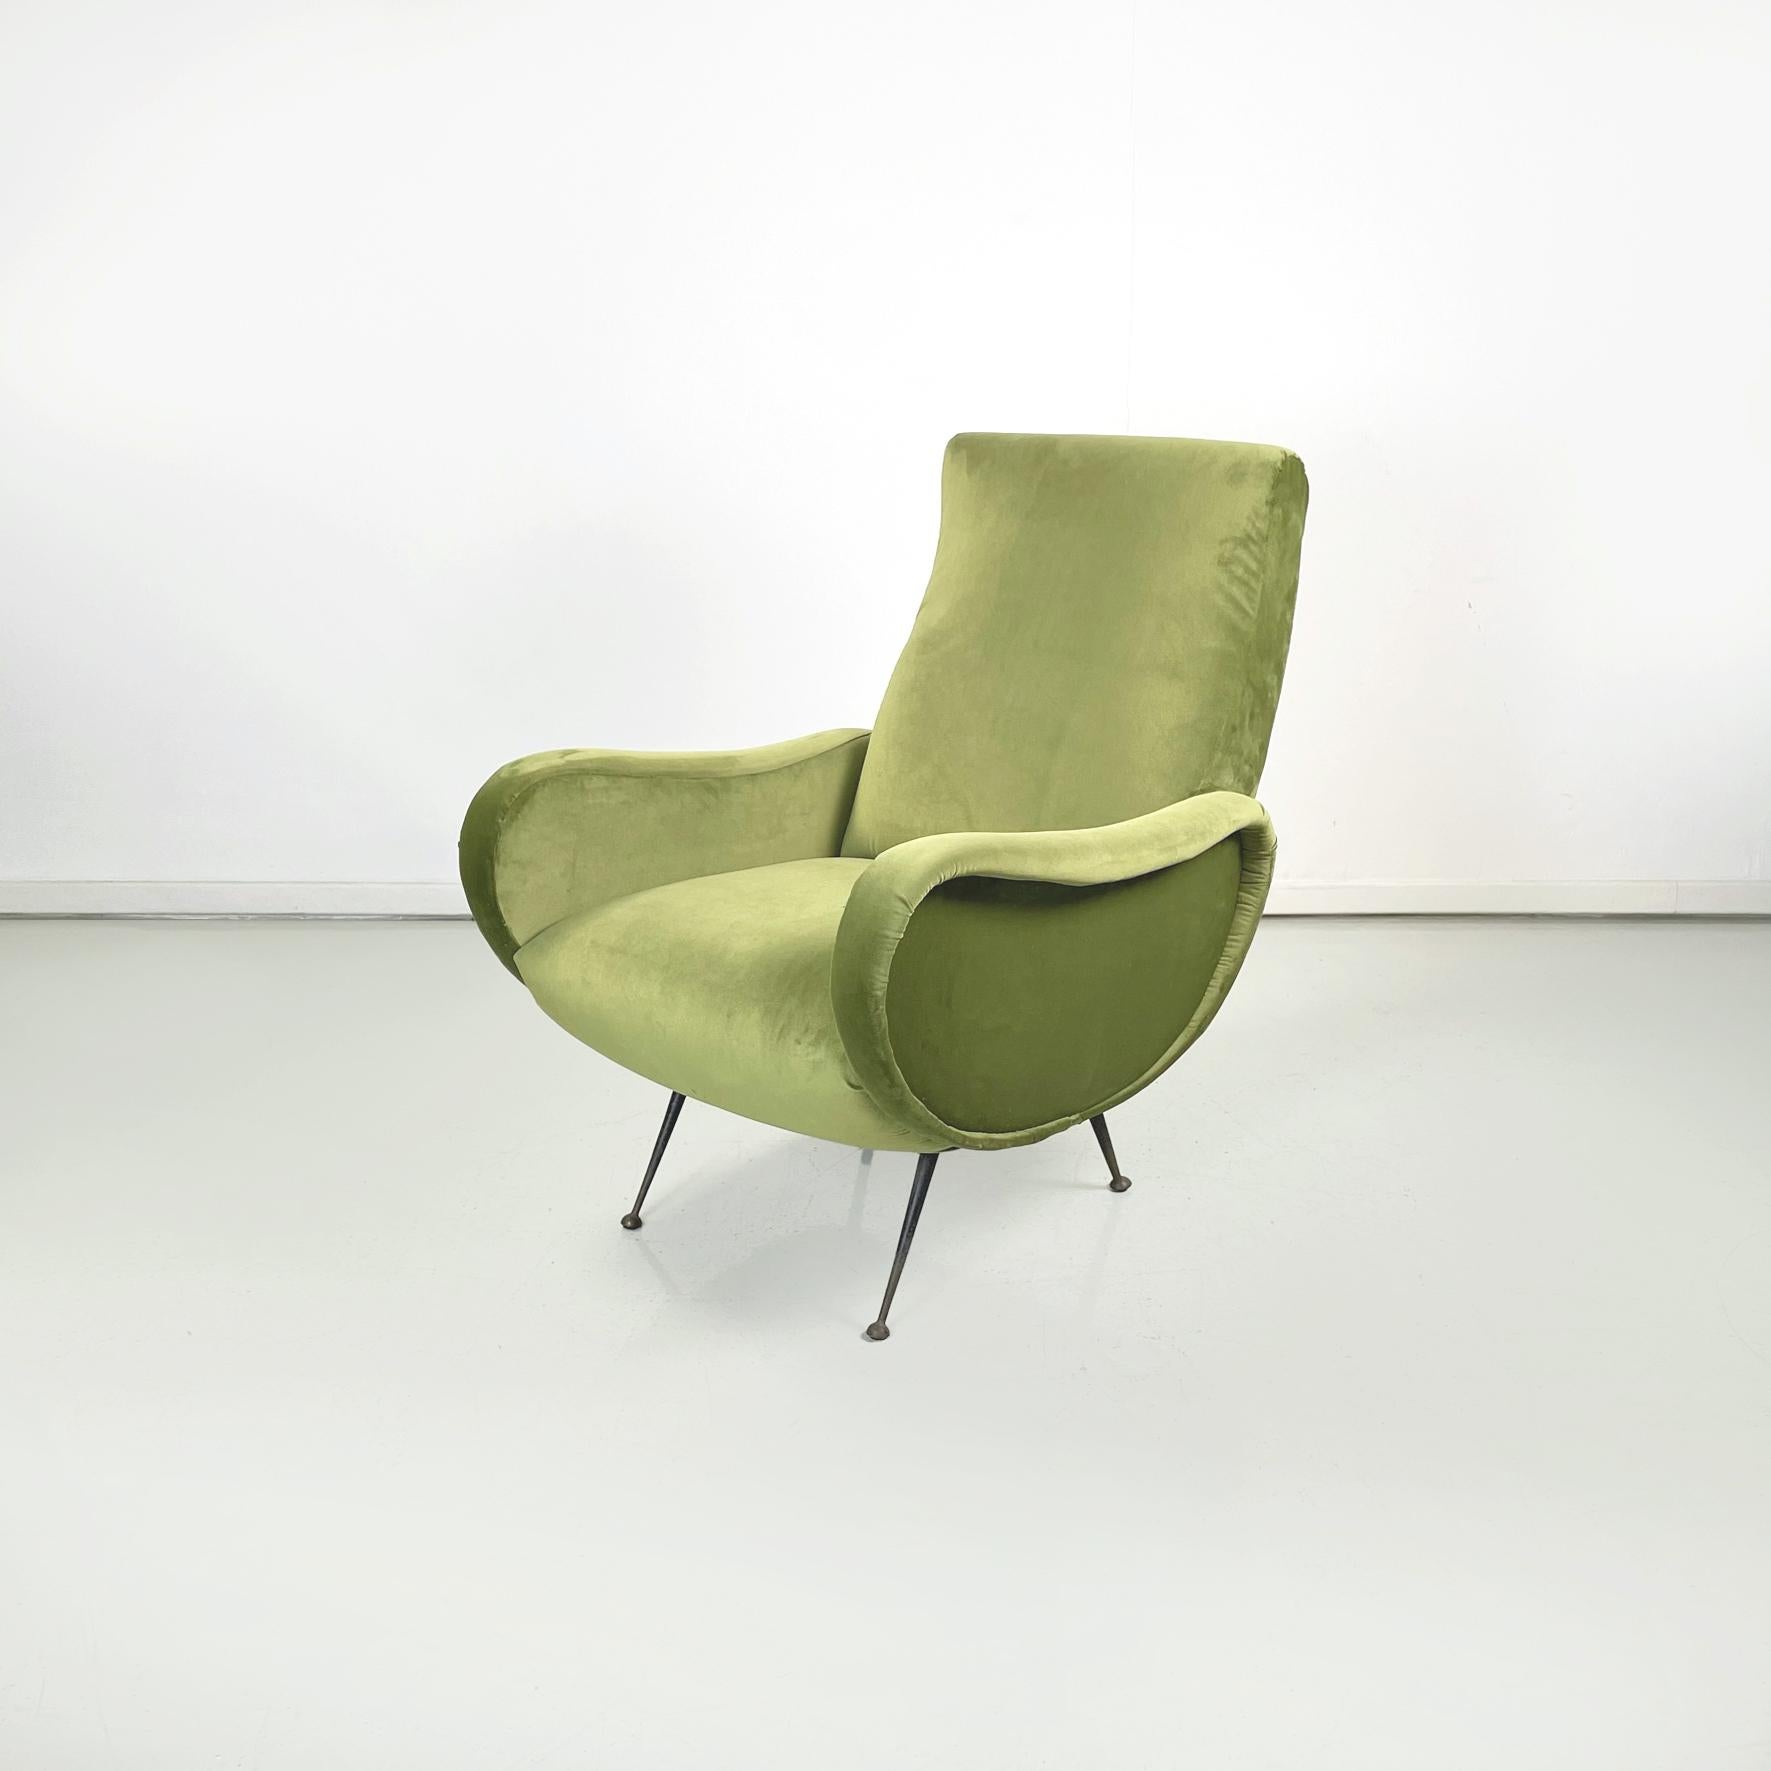 Italian midcentury Green velvet and black metal armchairs in Lady style, 1950s
Pair of armchairs, in style of Lady, in light green velvet. The armrests, the inclined backrest and the seat of the armchair have rounded and sinuous shapes. Round